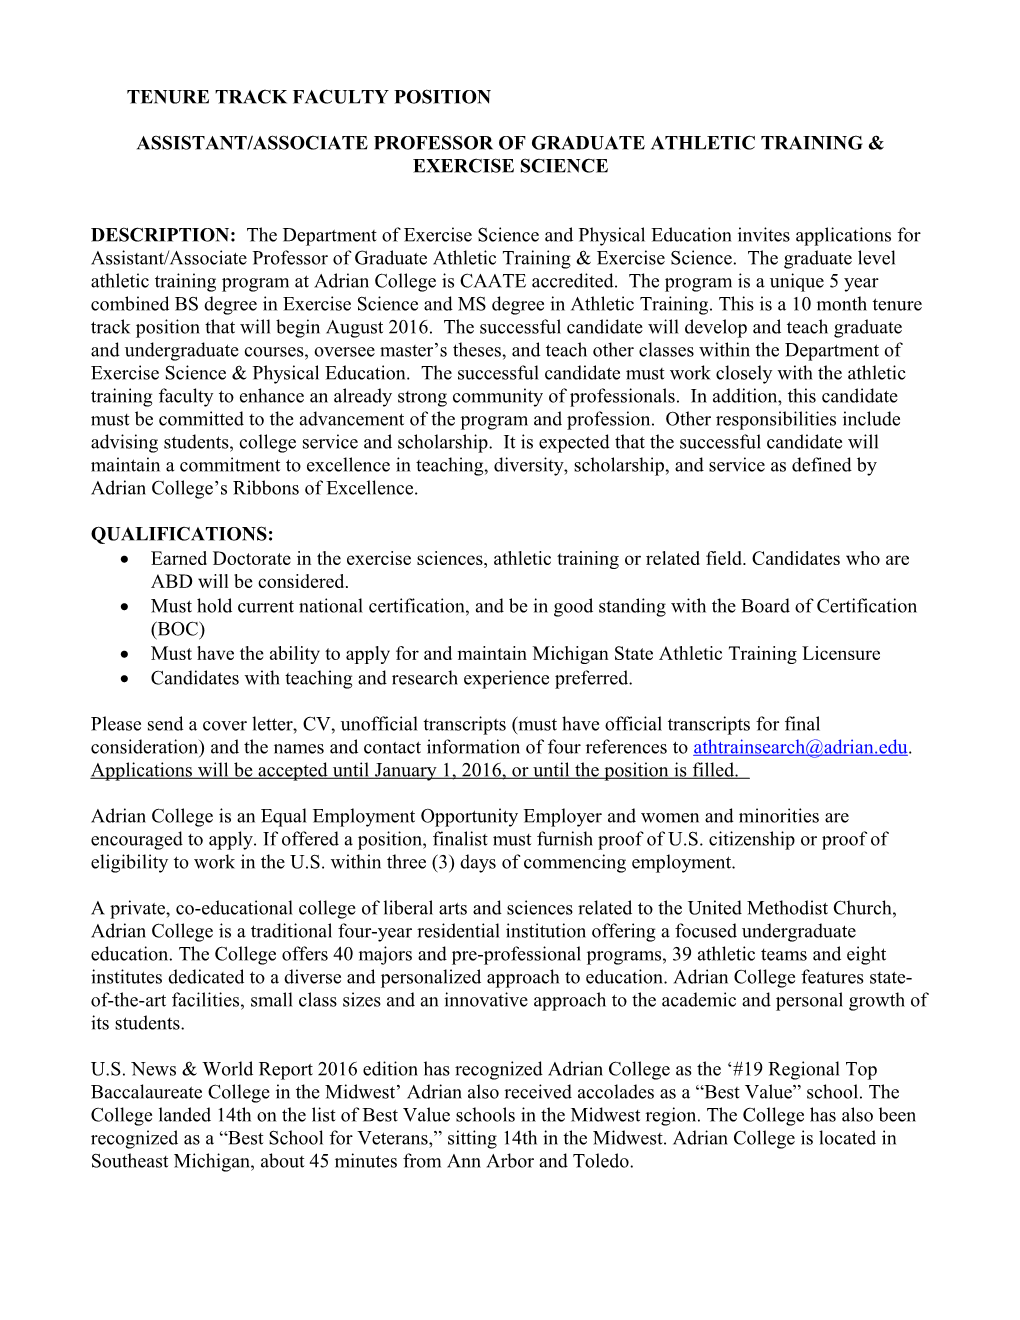 Tenure Track Faculty Position